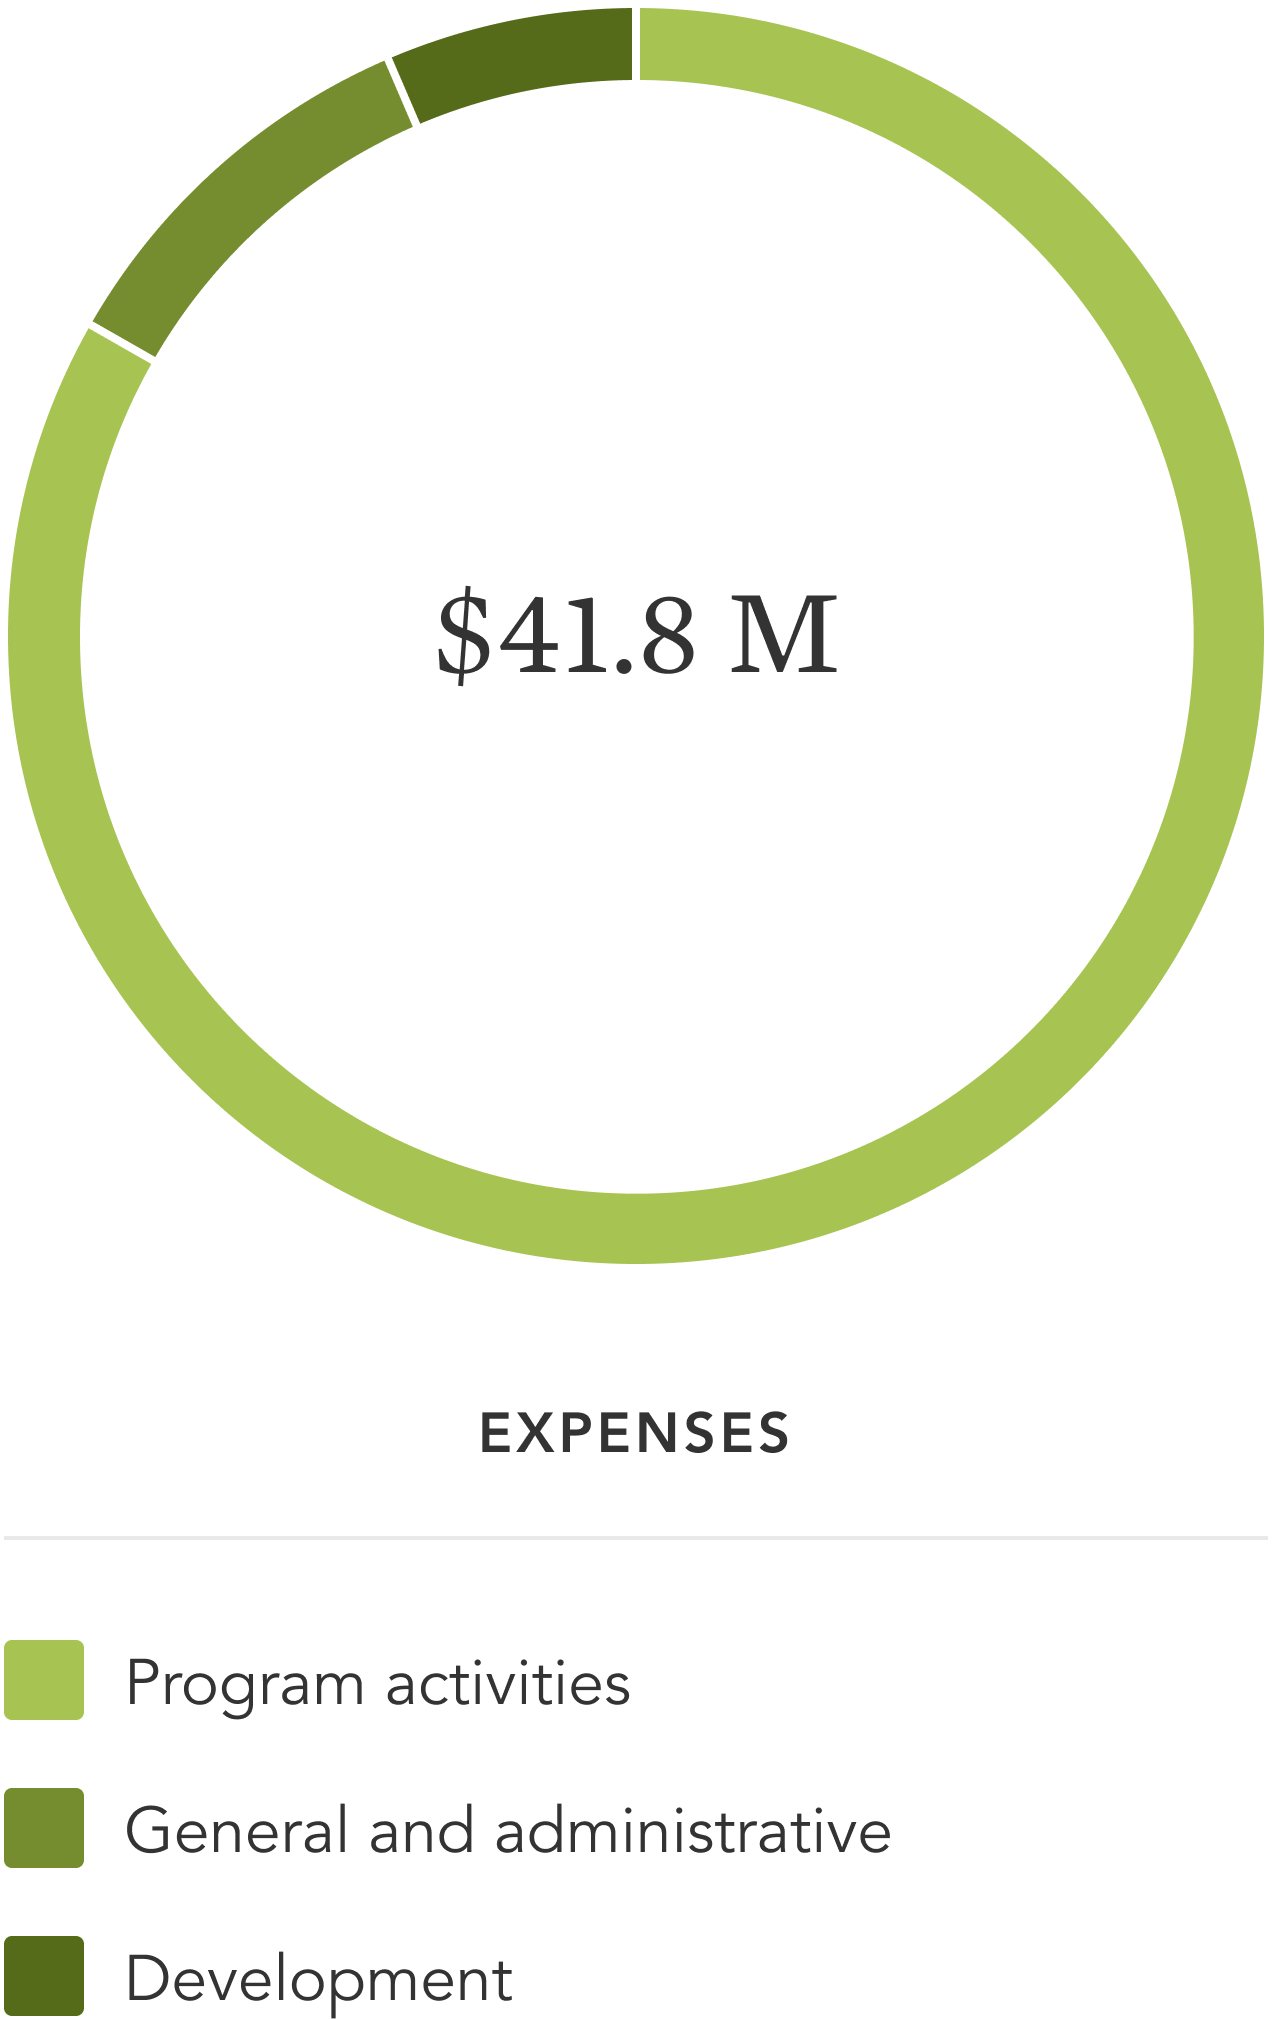 expenses image